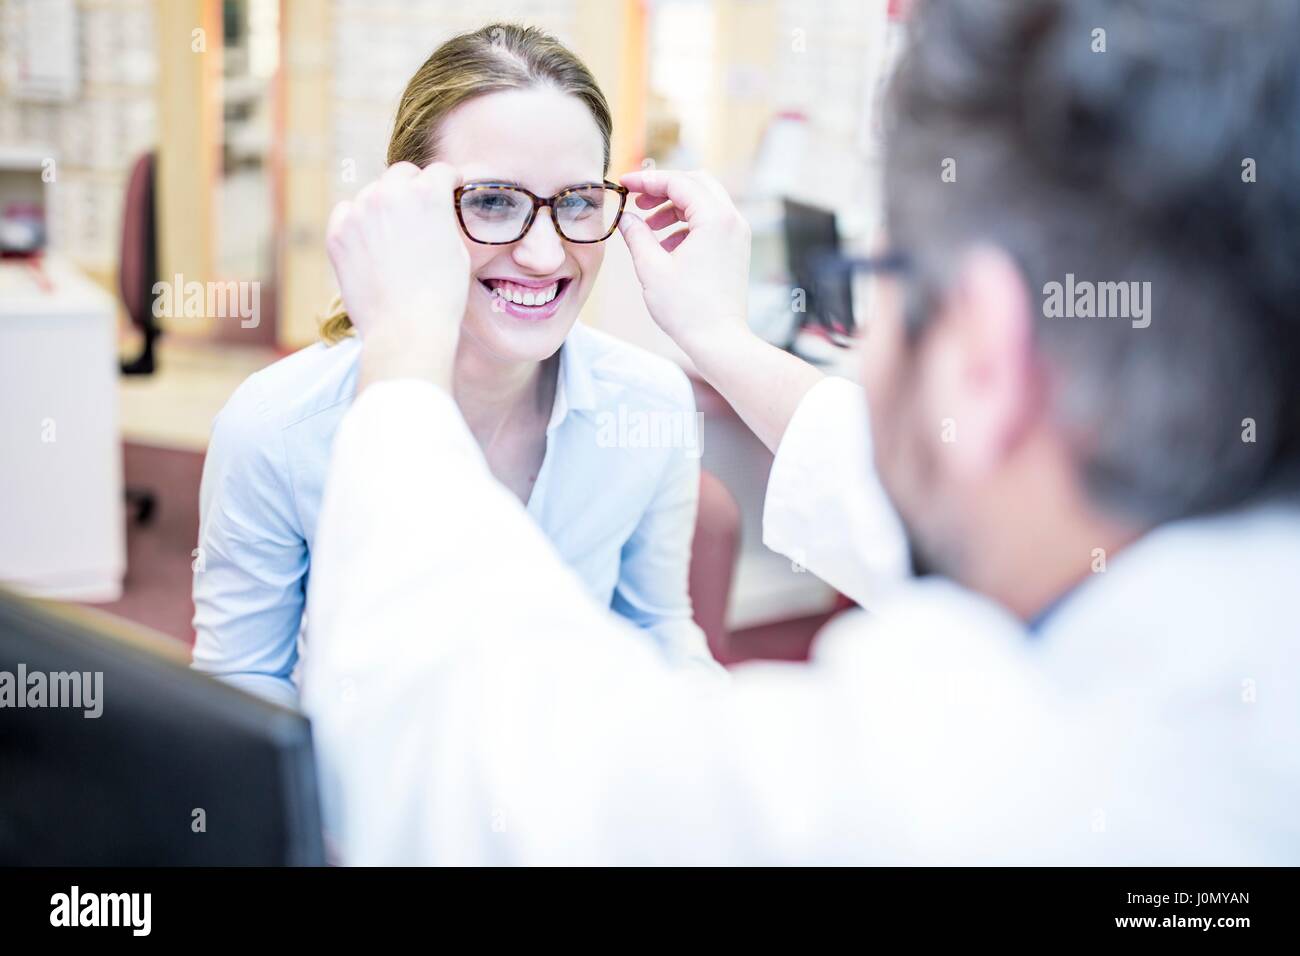 Optometrist trying glasses on woman in optometrist's shop. Stock Photo